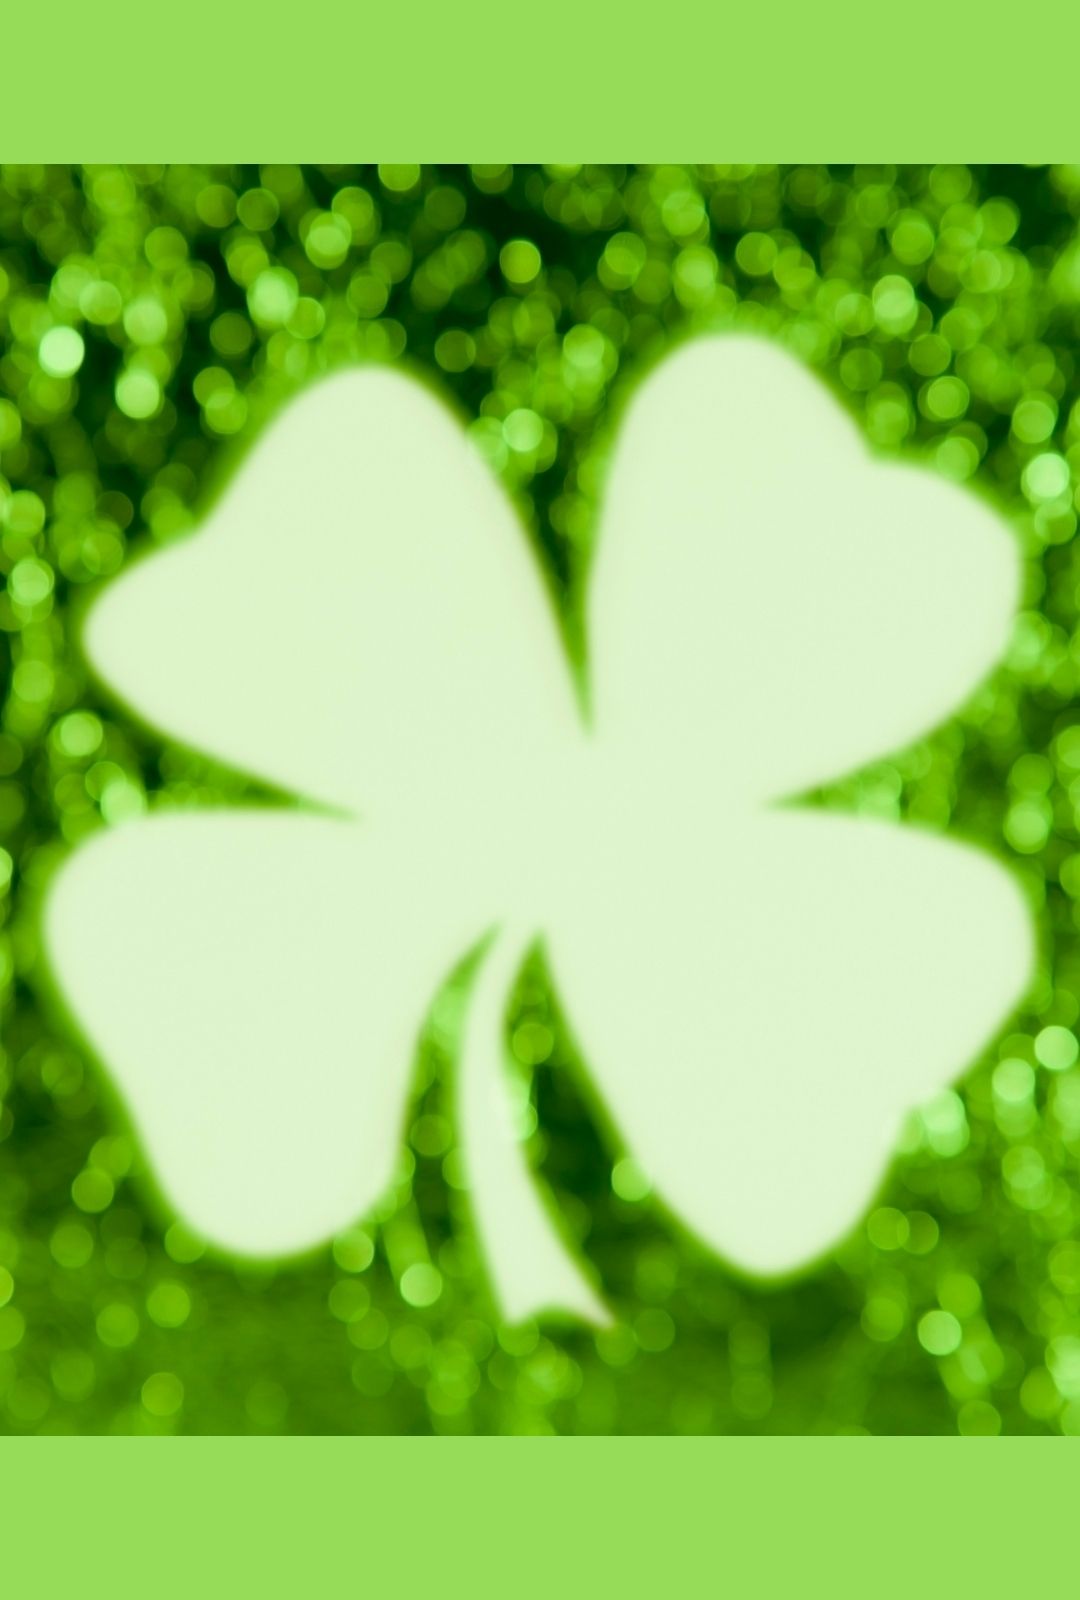 Lucky Clovers to Celebrate St. Paddy’s Day